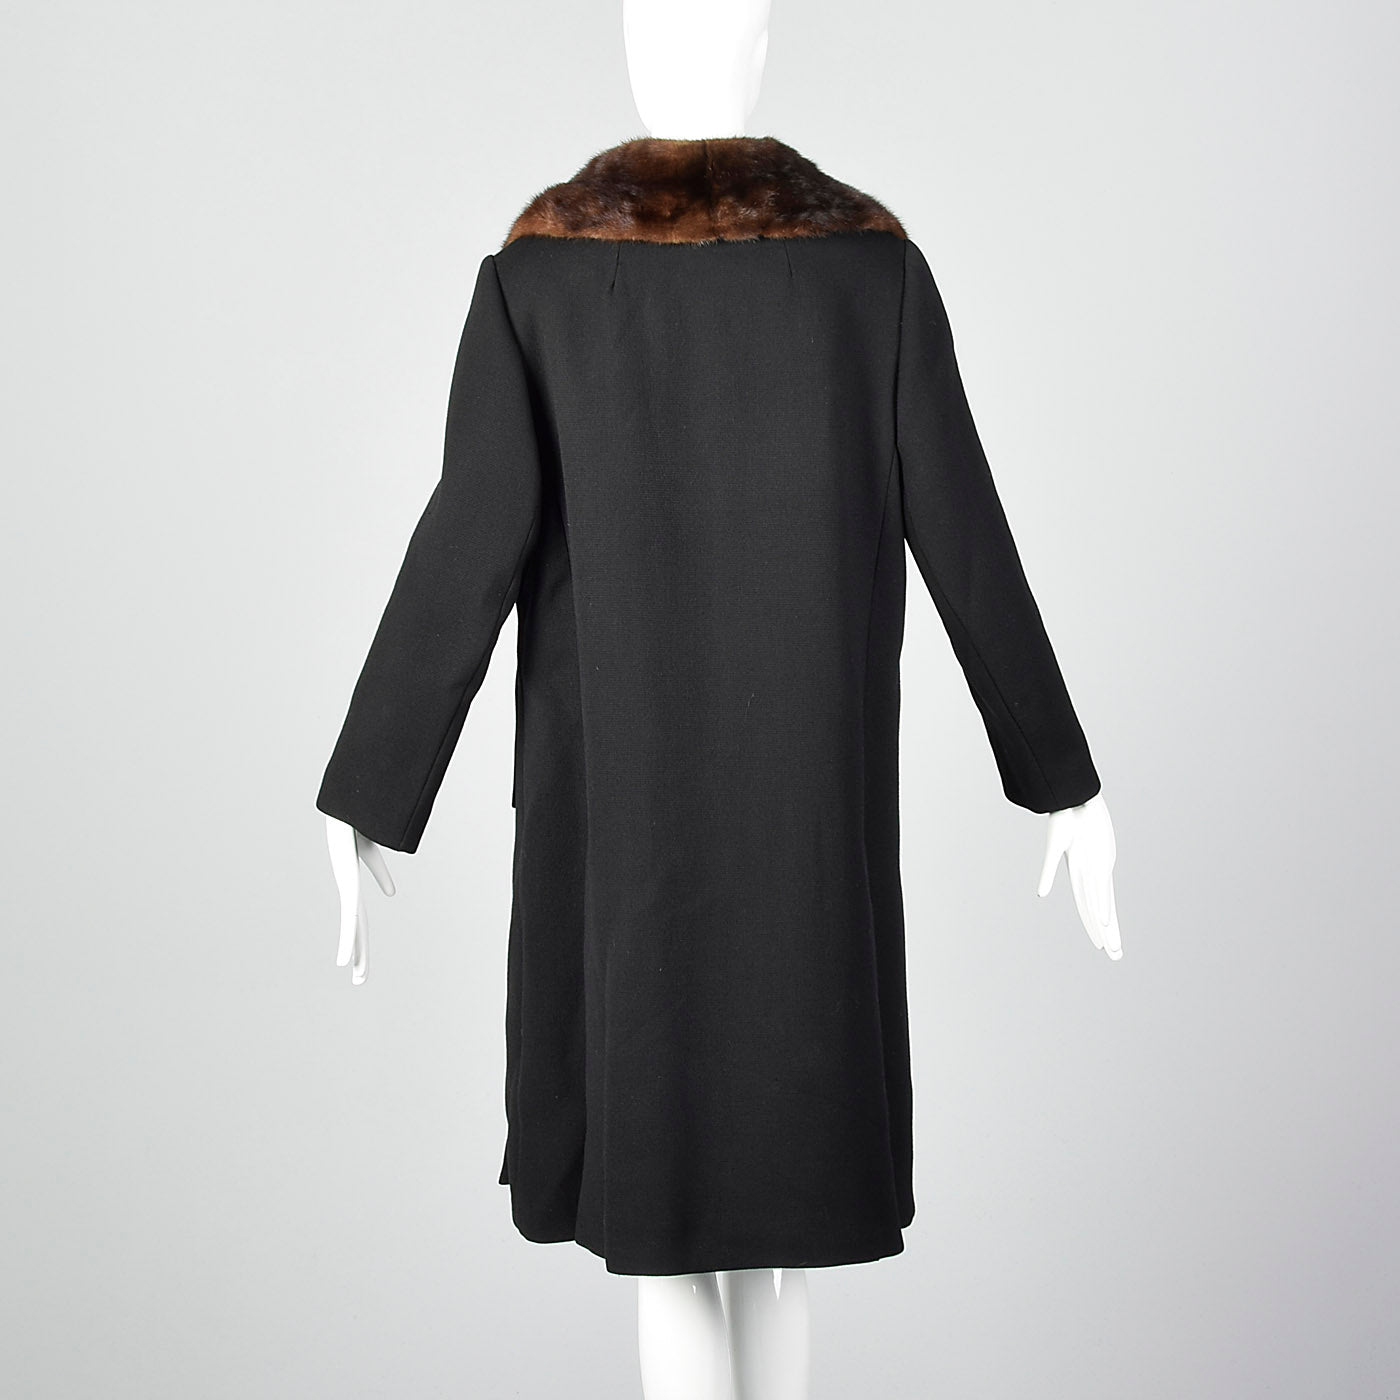 1960s Black Wool Double Breasted Coat with Mink Collar